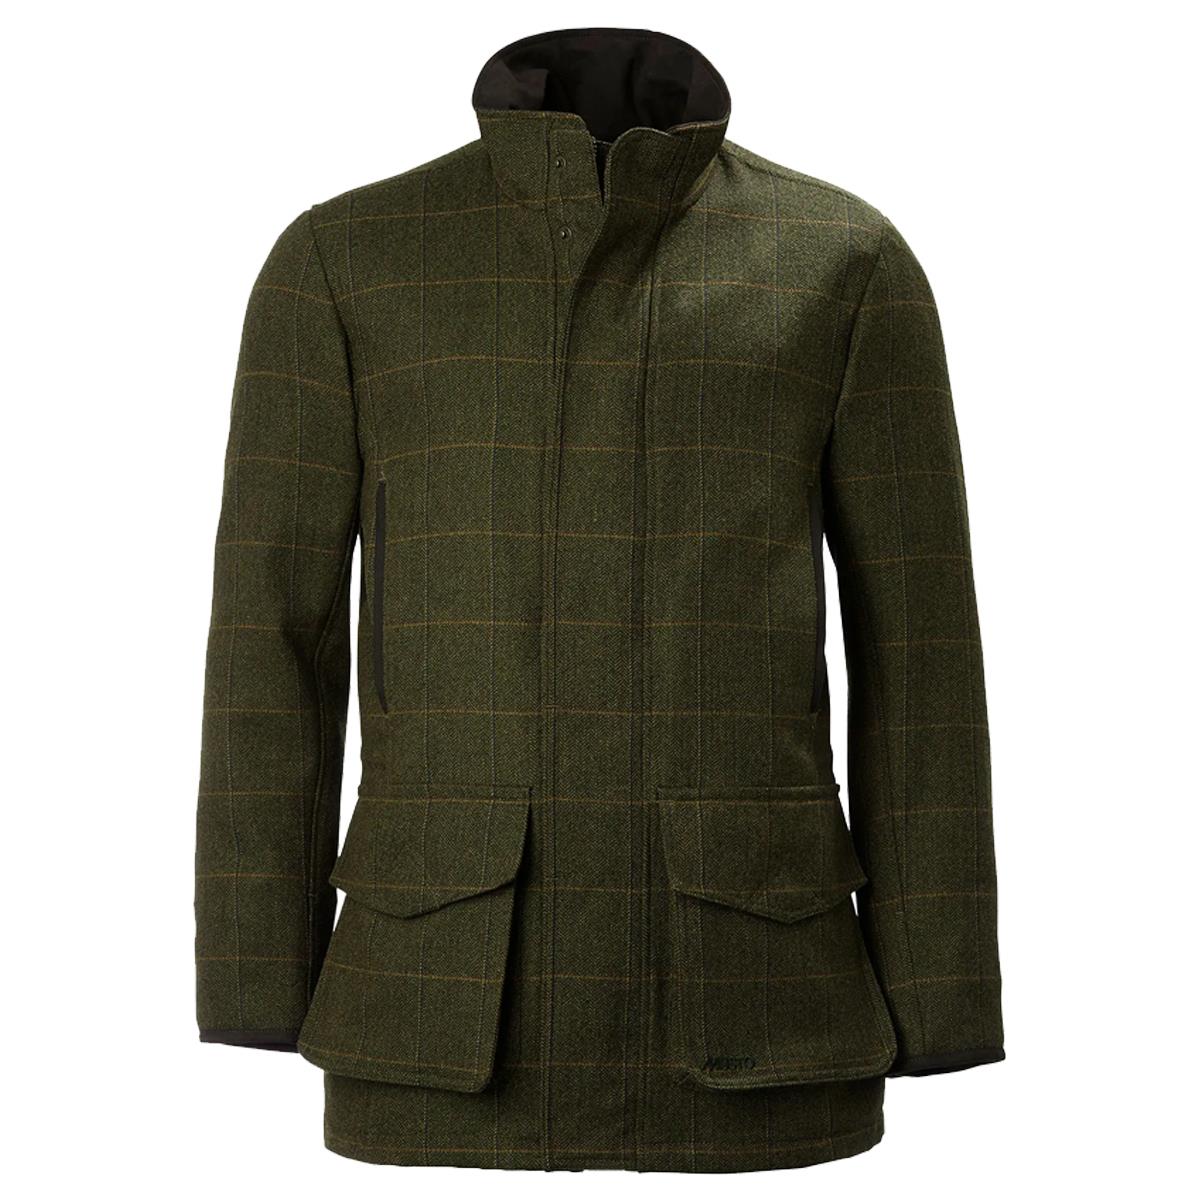 How to wear a tweed jacket?